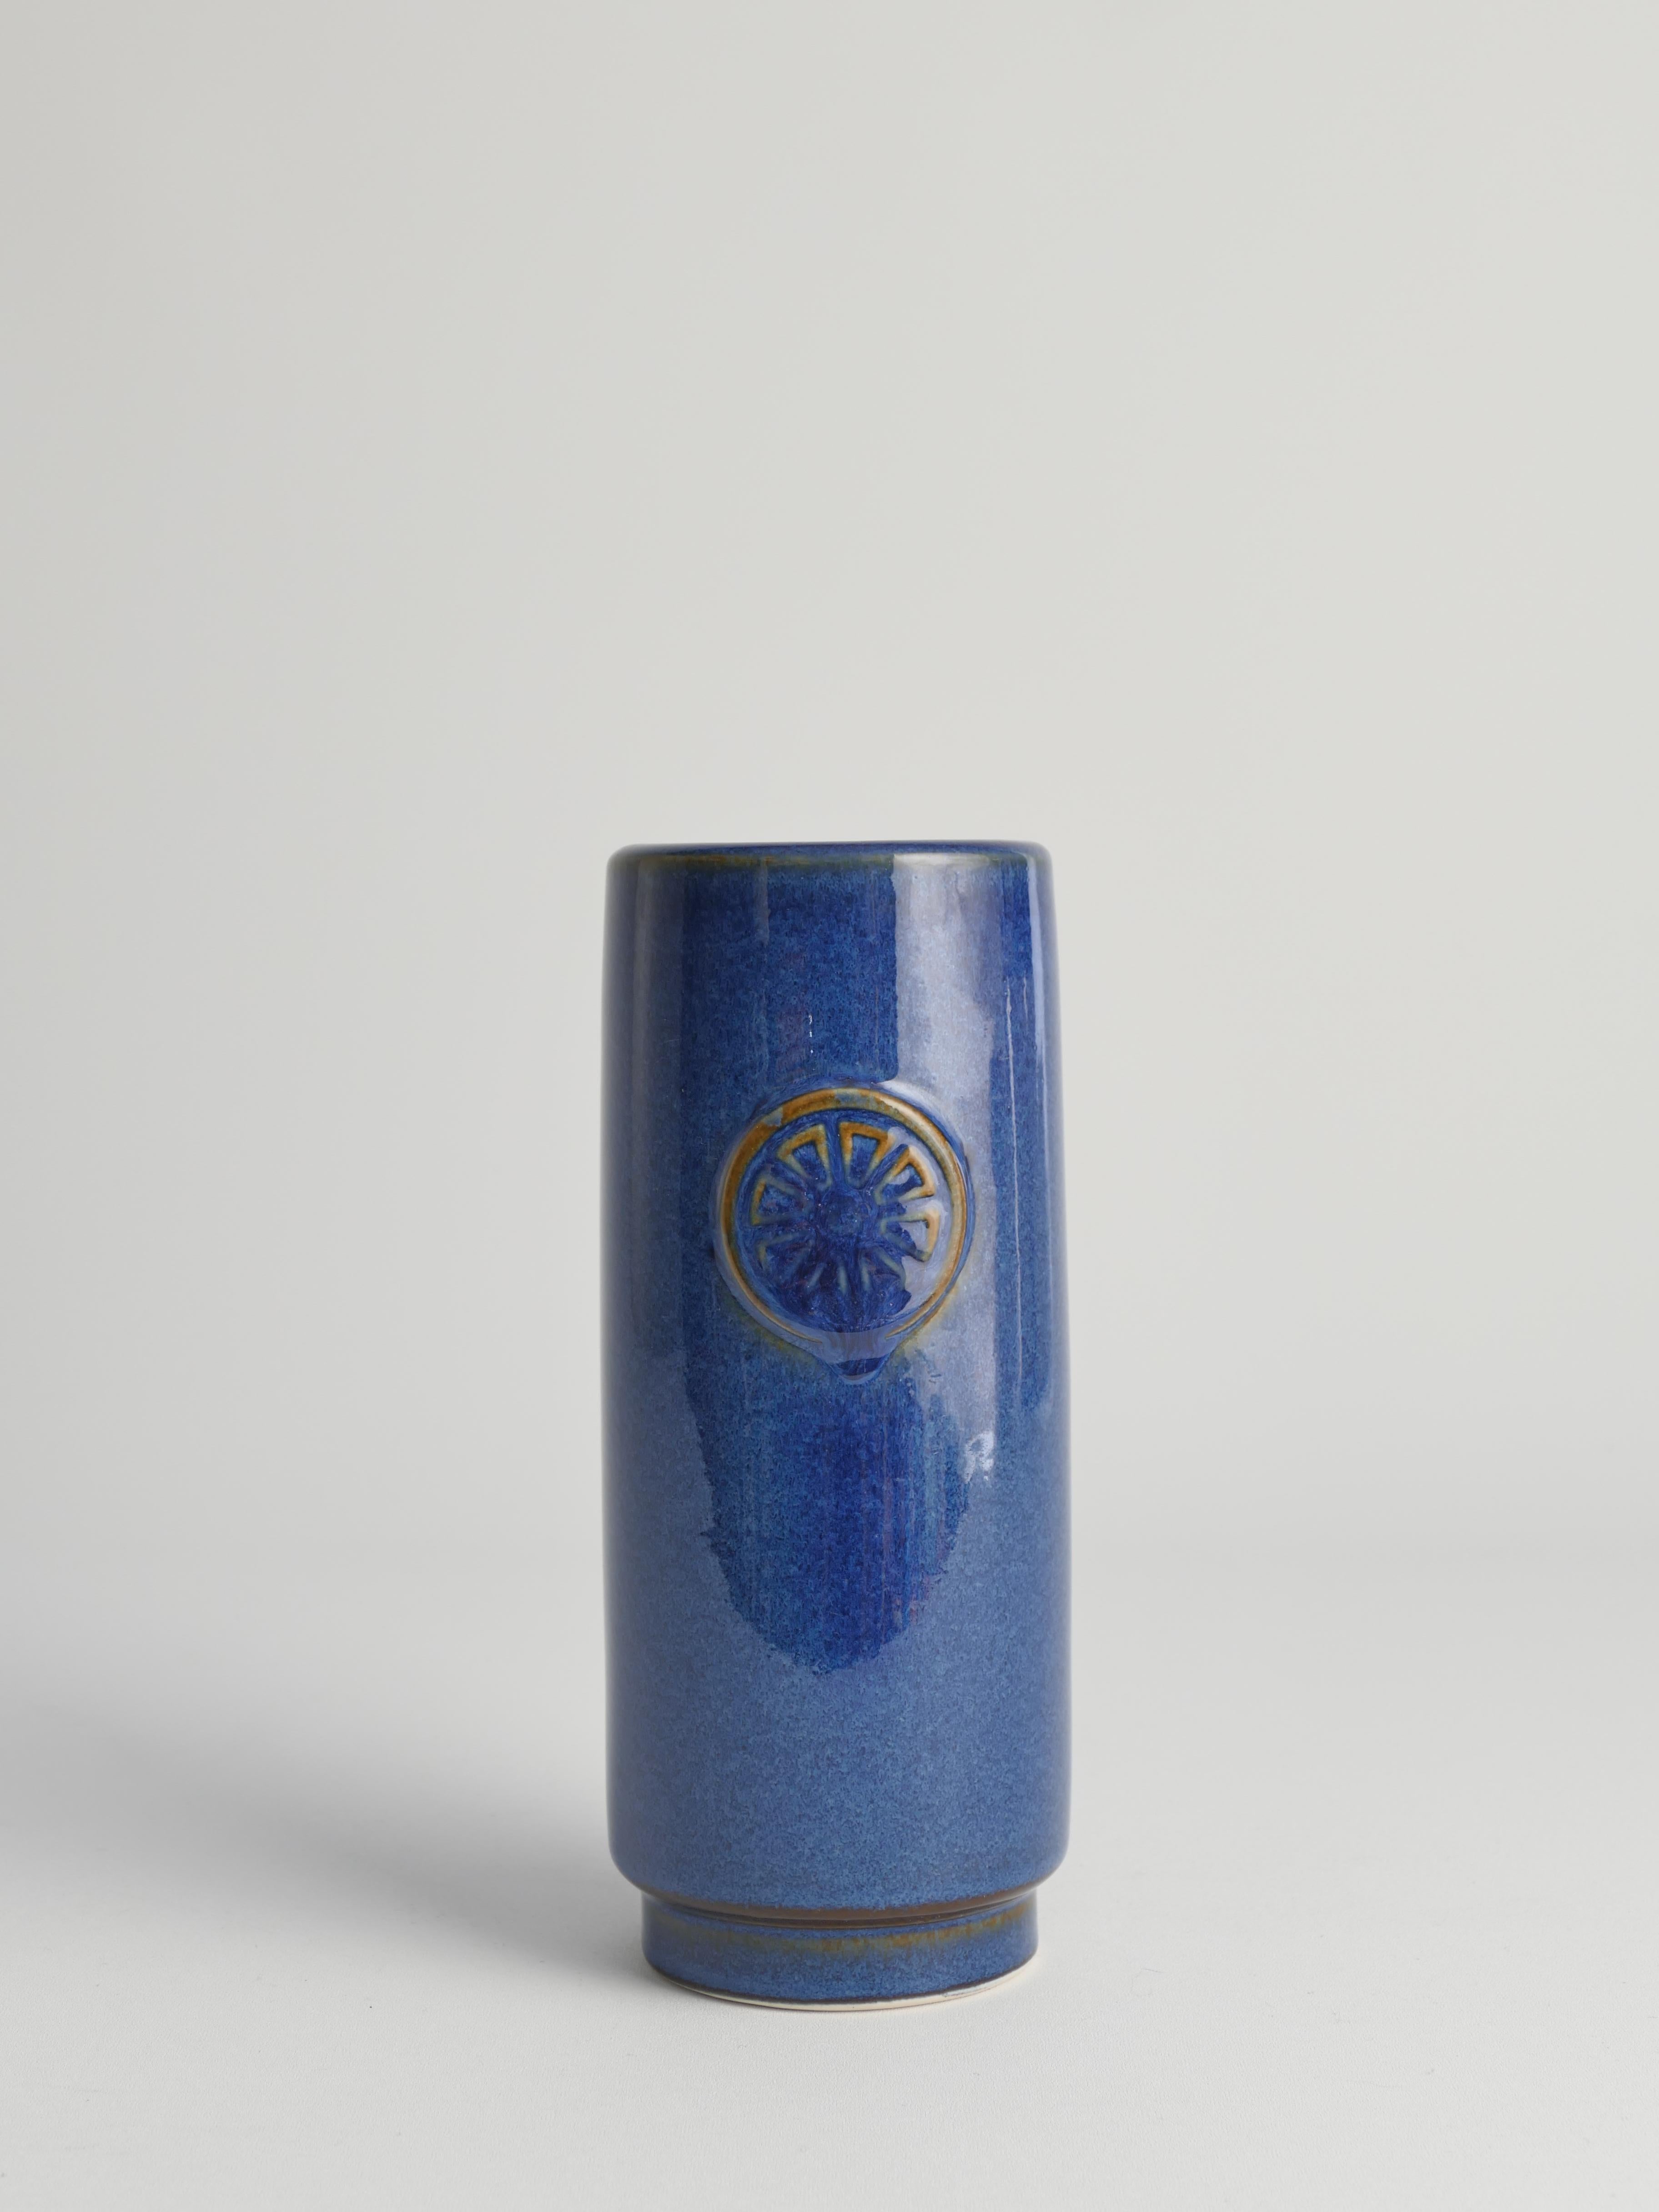 Hand-Crafted Blue Stoneware Vase from Nordlys Series by Maria Philippi for Søholm, 1960s For Sale